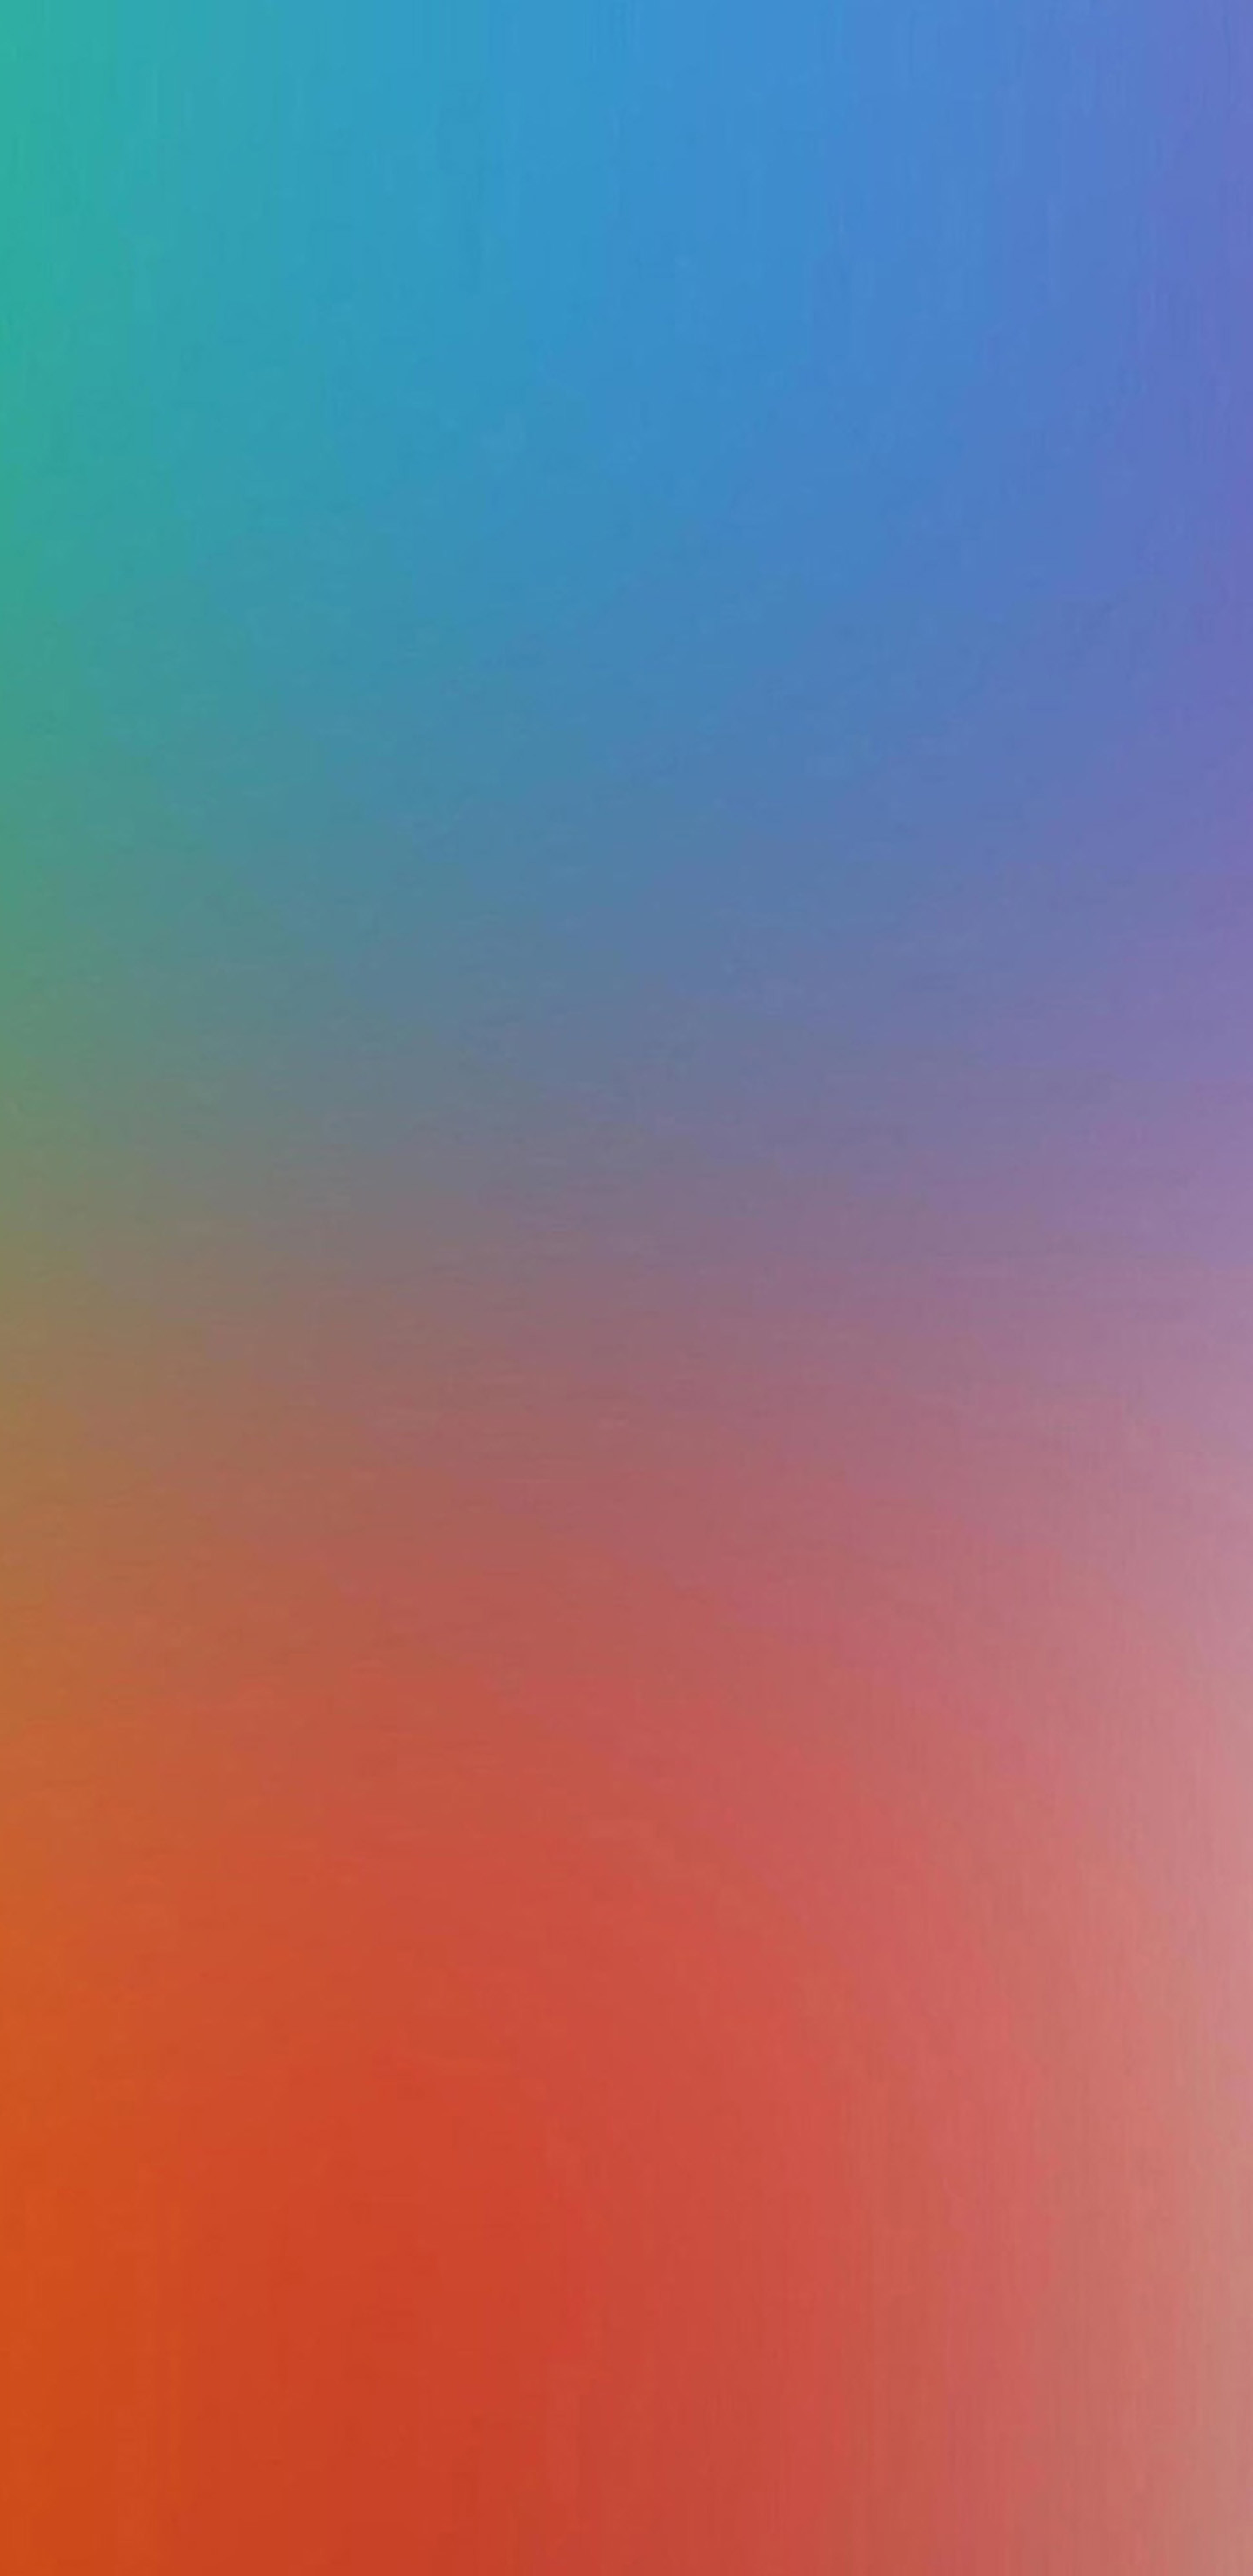 1440x2960 Gradient background 15 Galaxy S8 Wallpapers